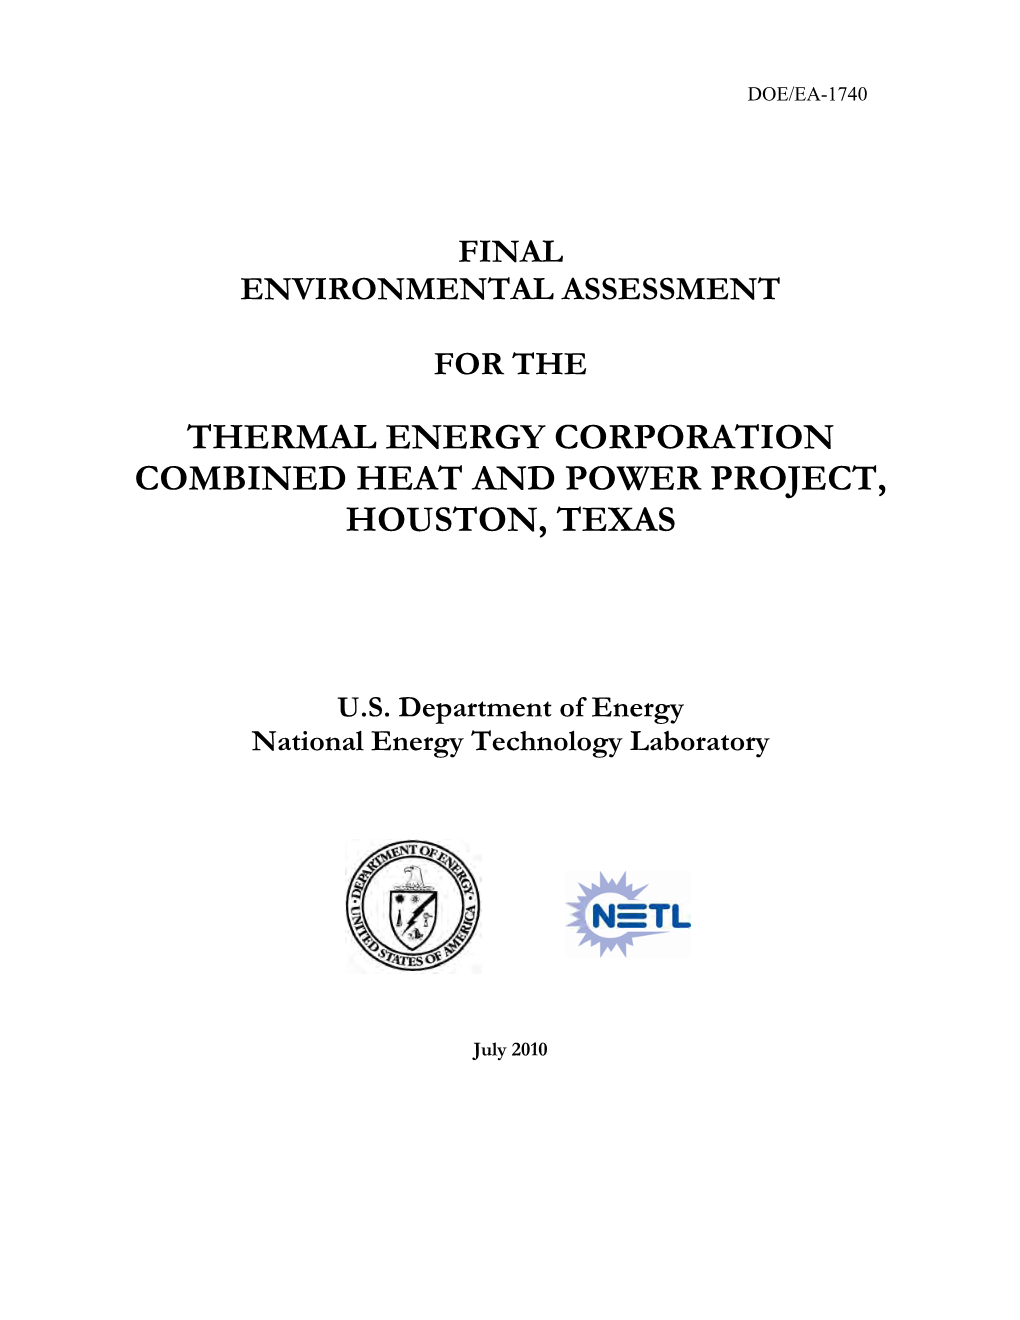 Thermal Energy Corporation Combined Heat and Power Project, Houston, Texas